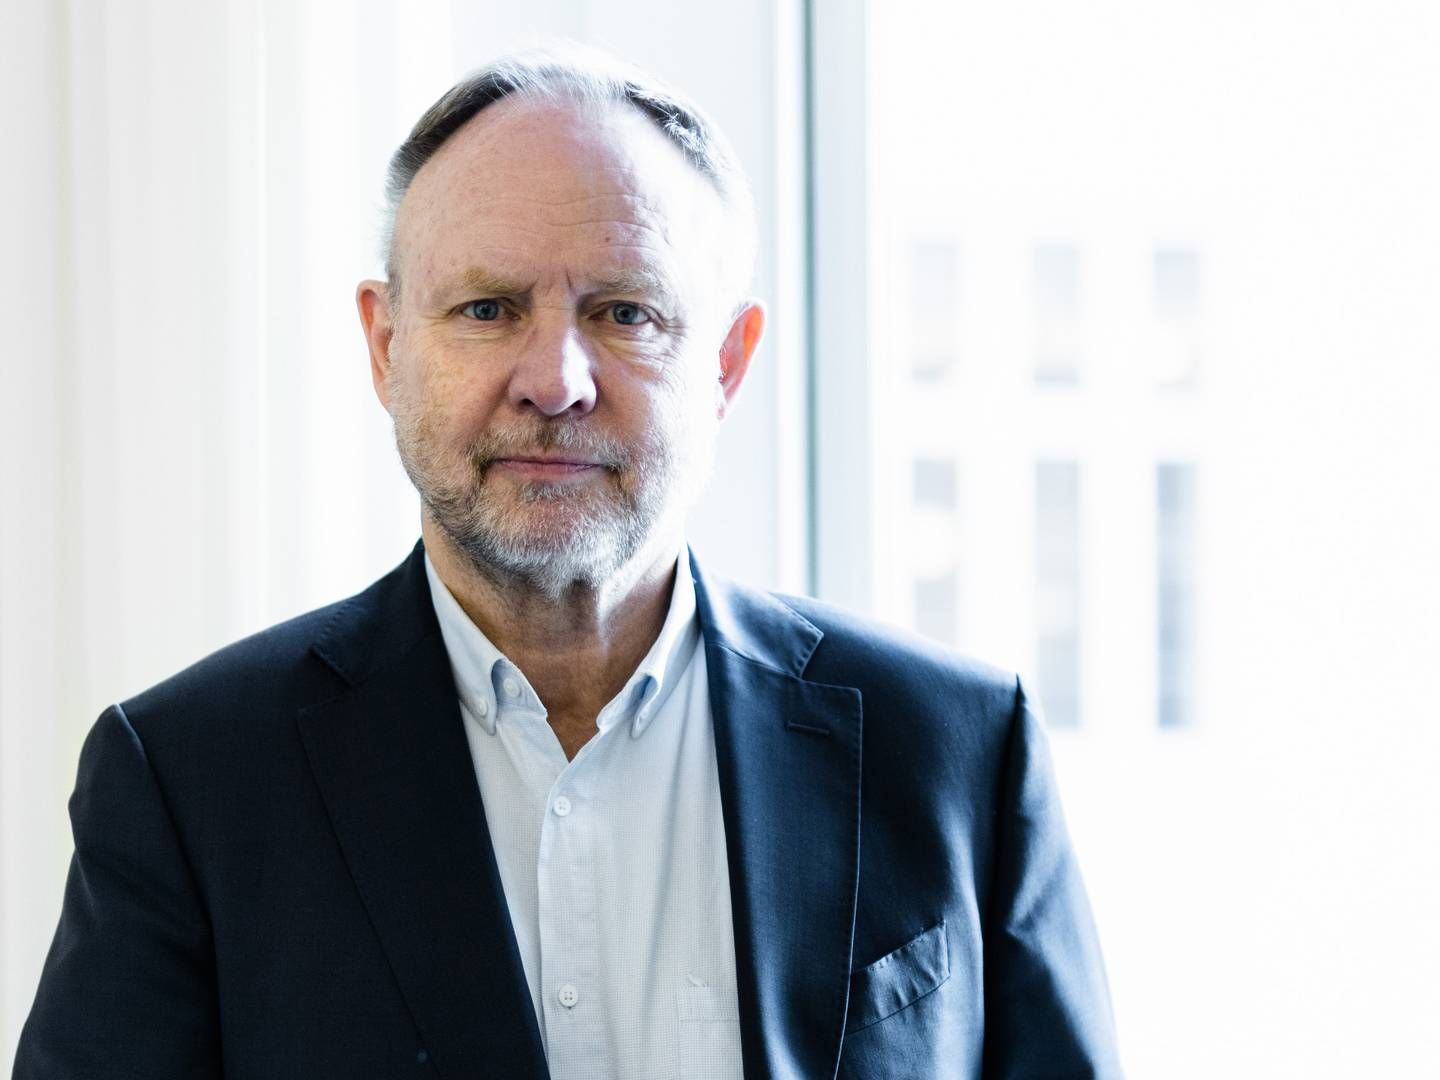 Jesper Kirstein founded Kirstein A/S in 1993. Now he is closing down the consulting and advisory firm after almost three decades. | Photo: PR/Kirstein A/S